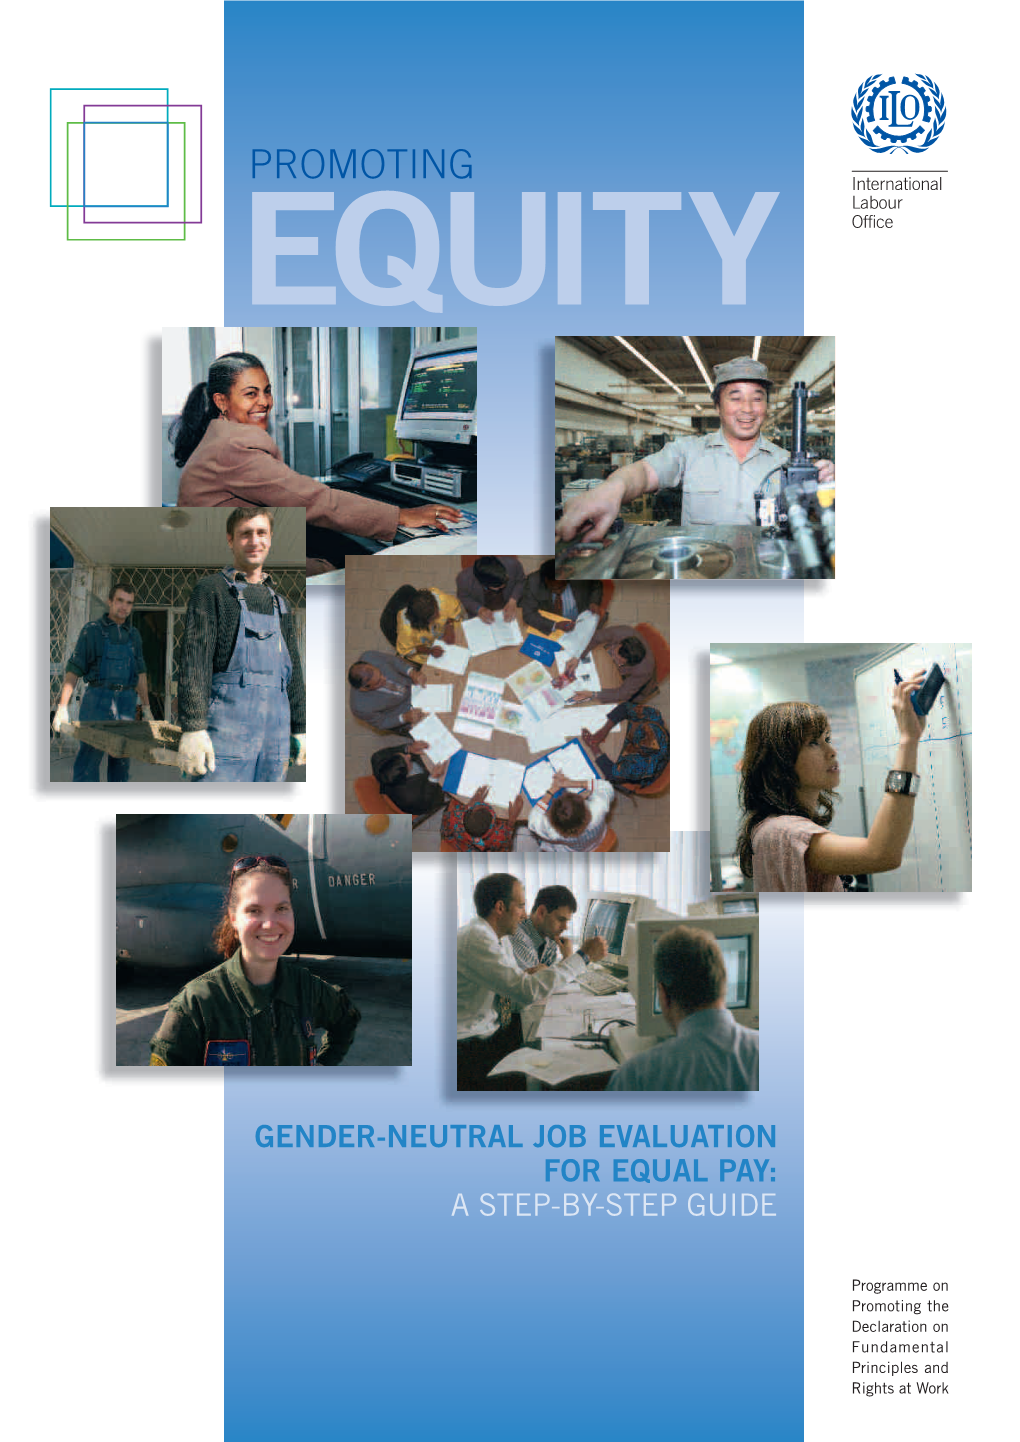 Promoting Equity: Gender-Neutral Job Evaluation for Equal Pay. A